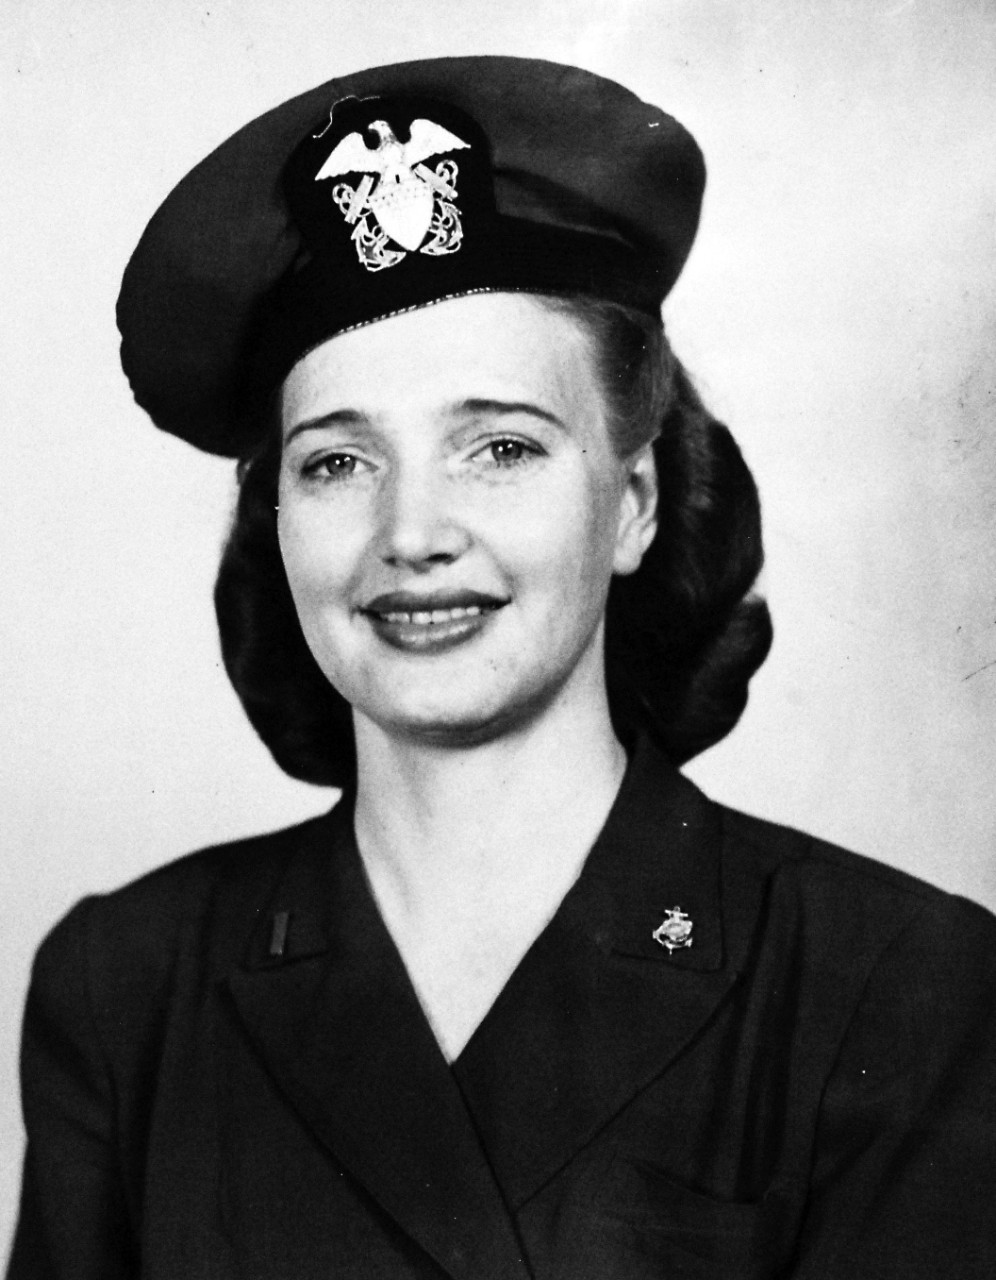 80-G-457160:  Ensign Mary E. Haims, NC, USNR, July 1944.  Note the Nurse Corps Insignia.  Haims was stationed at Naval Air Station, Glynco, Georgia,       Photographed by Nick, July 28, 1944.  Official U.S. Navy photograph, now in the collections of the National Archives.   